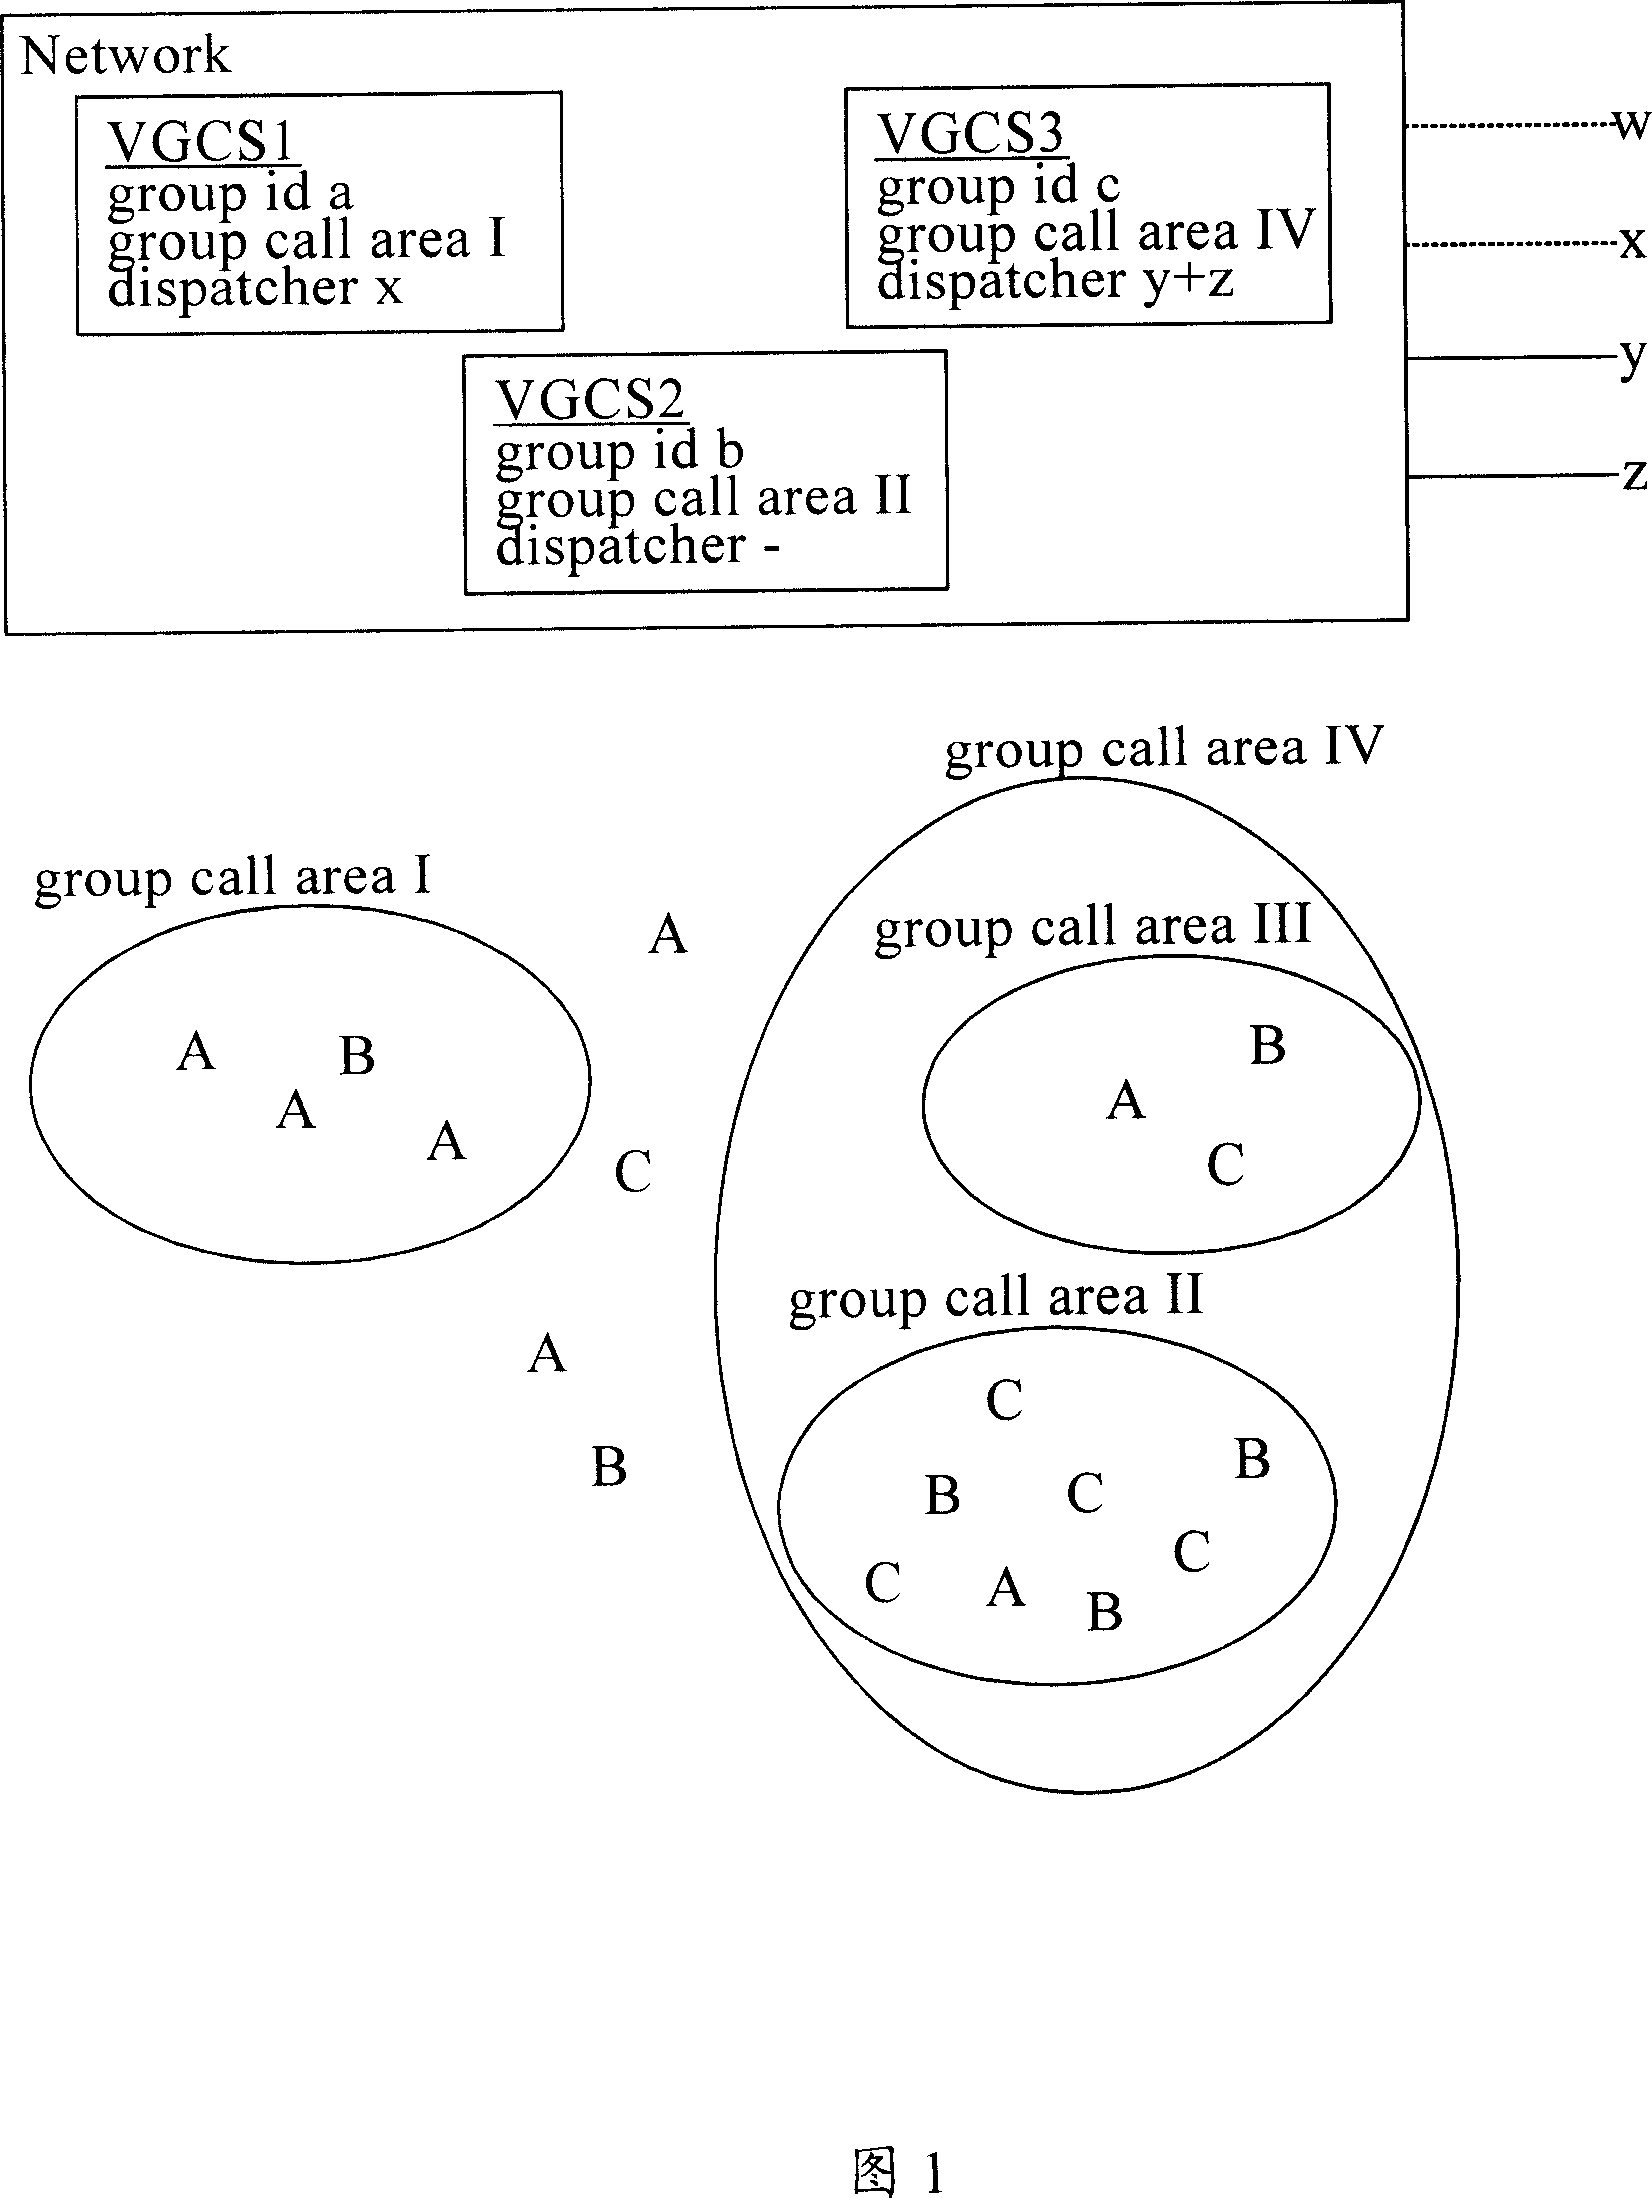 Method for releasing voice group call uplink